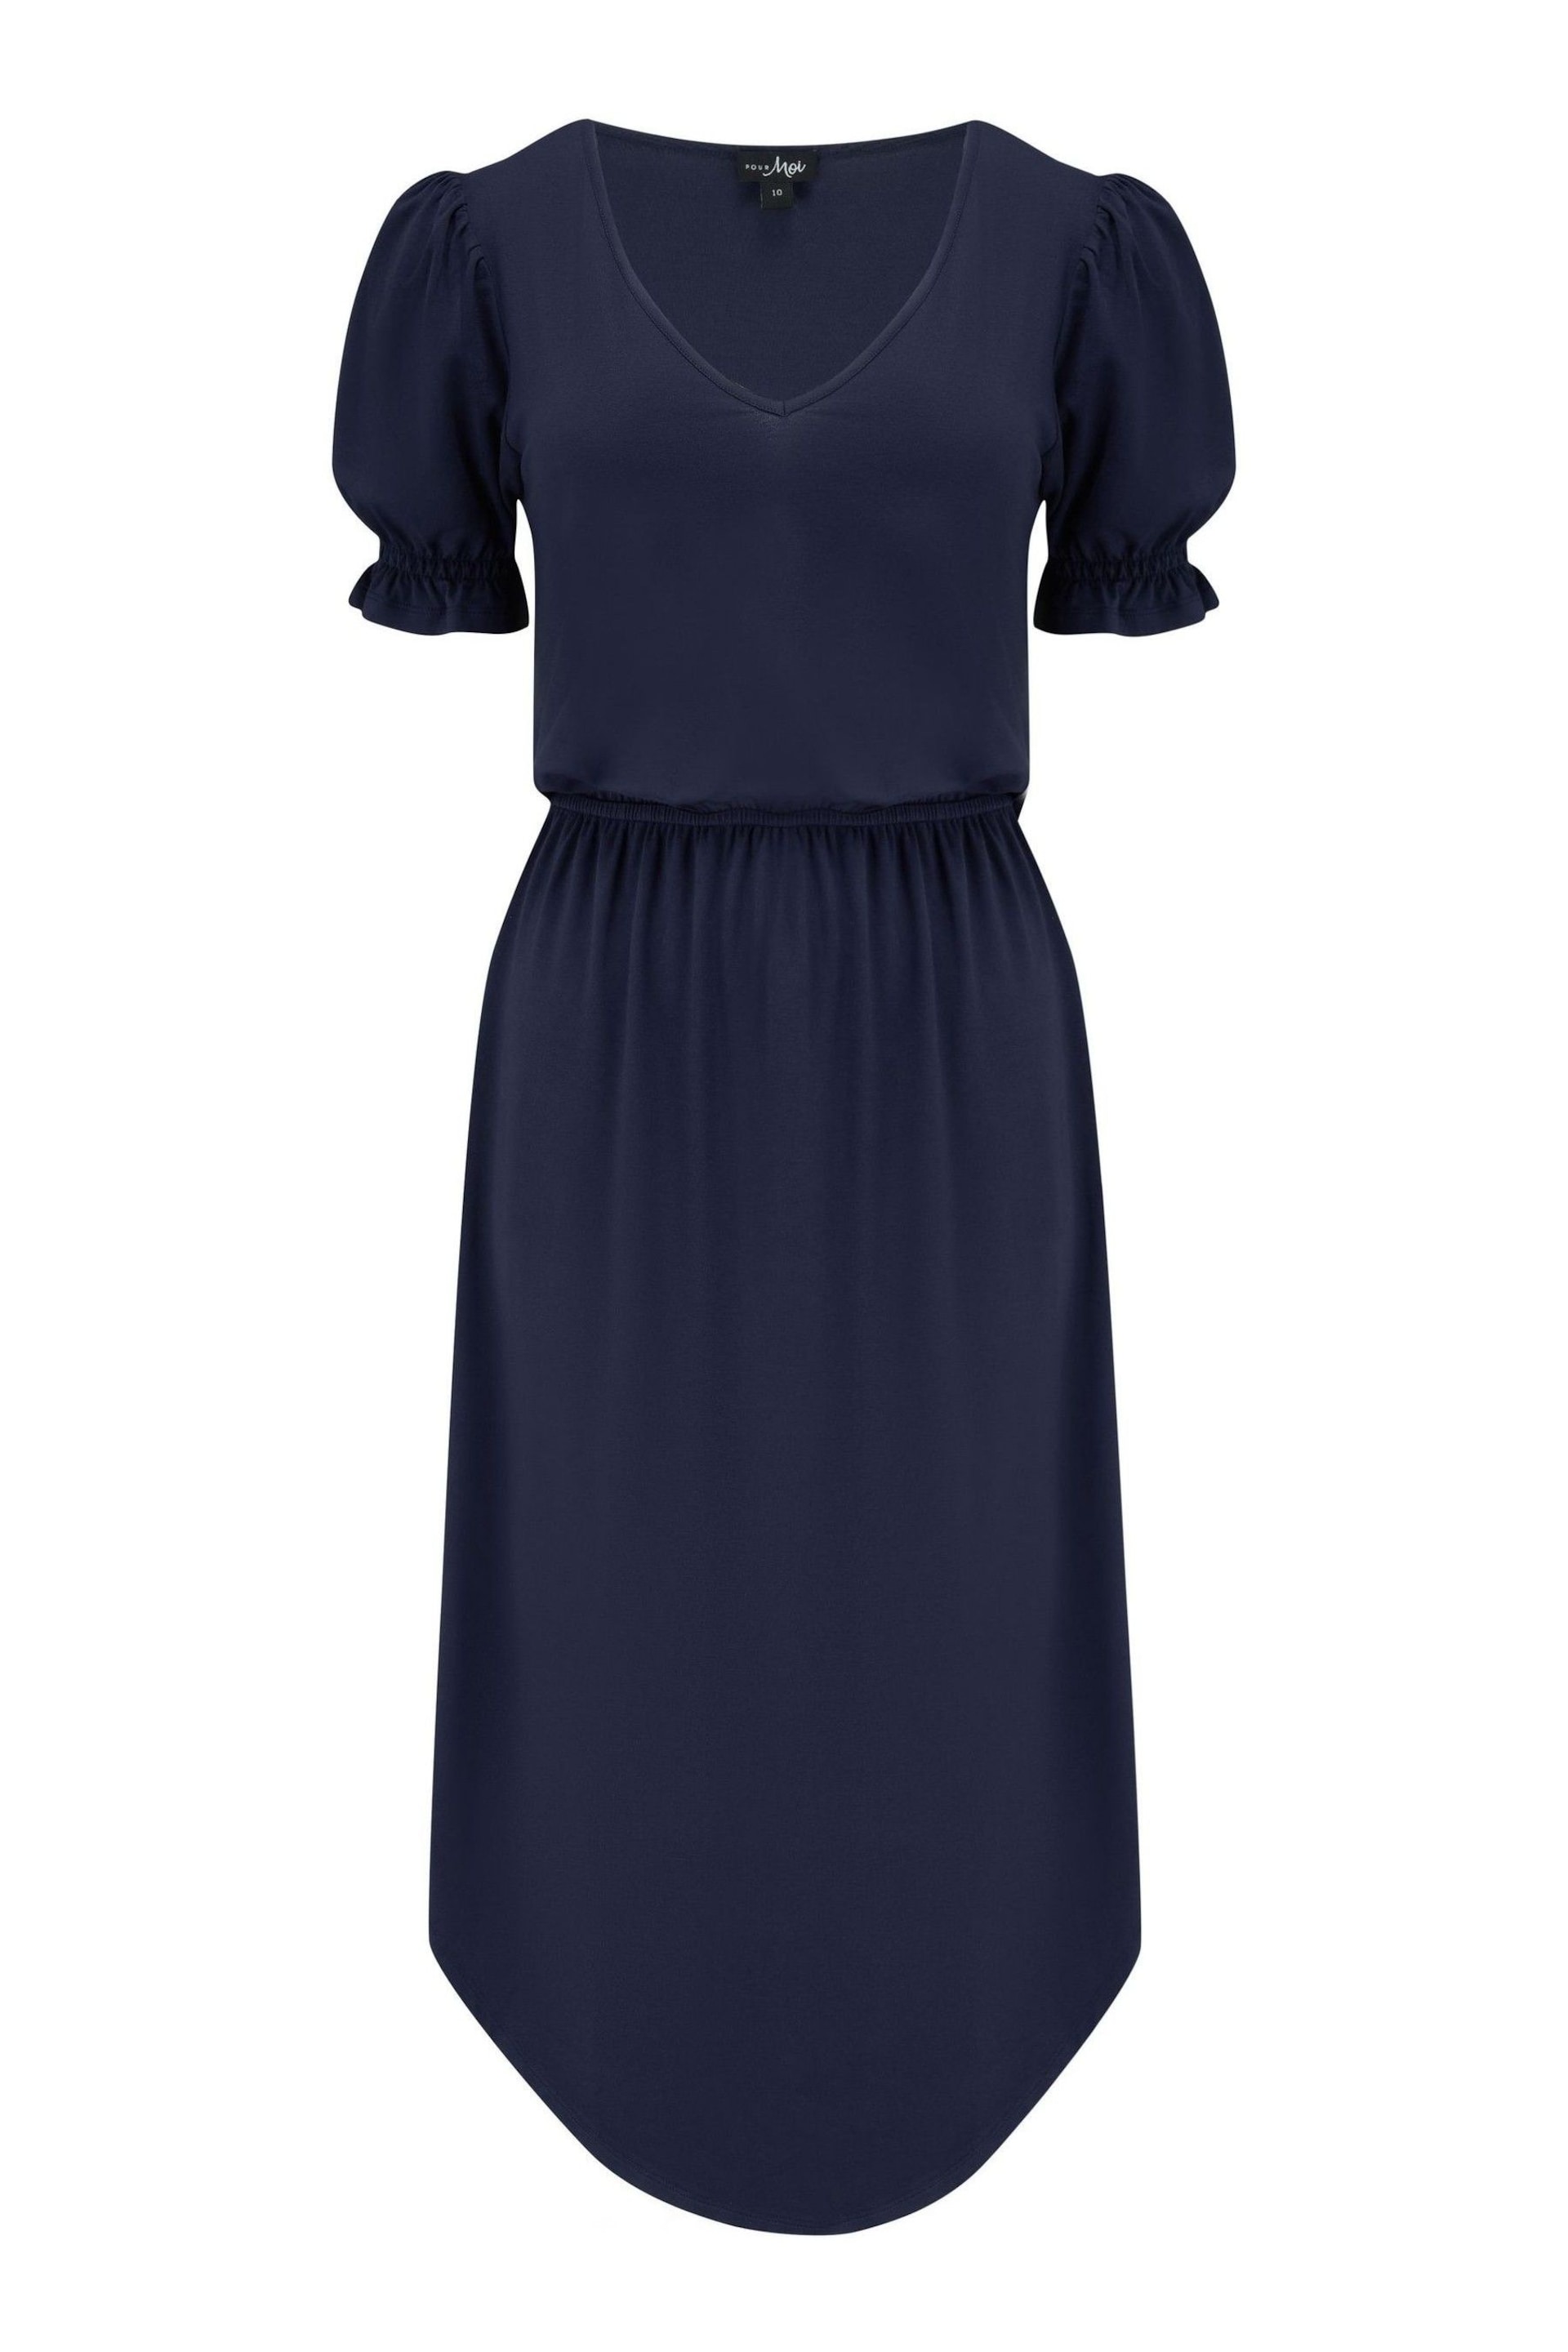 Pour Moi Blue Jenny Puff Sleeve Jersey Midi Dress with LENZING™ ECOVERO™ Viscose - Image 3 of 4